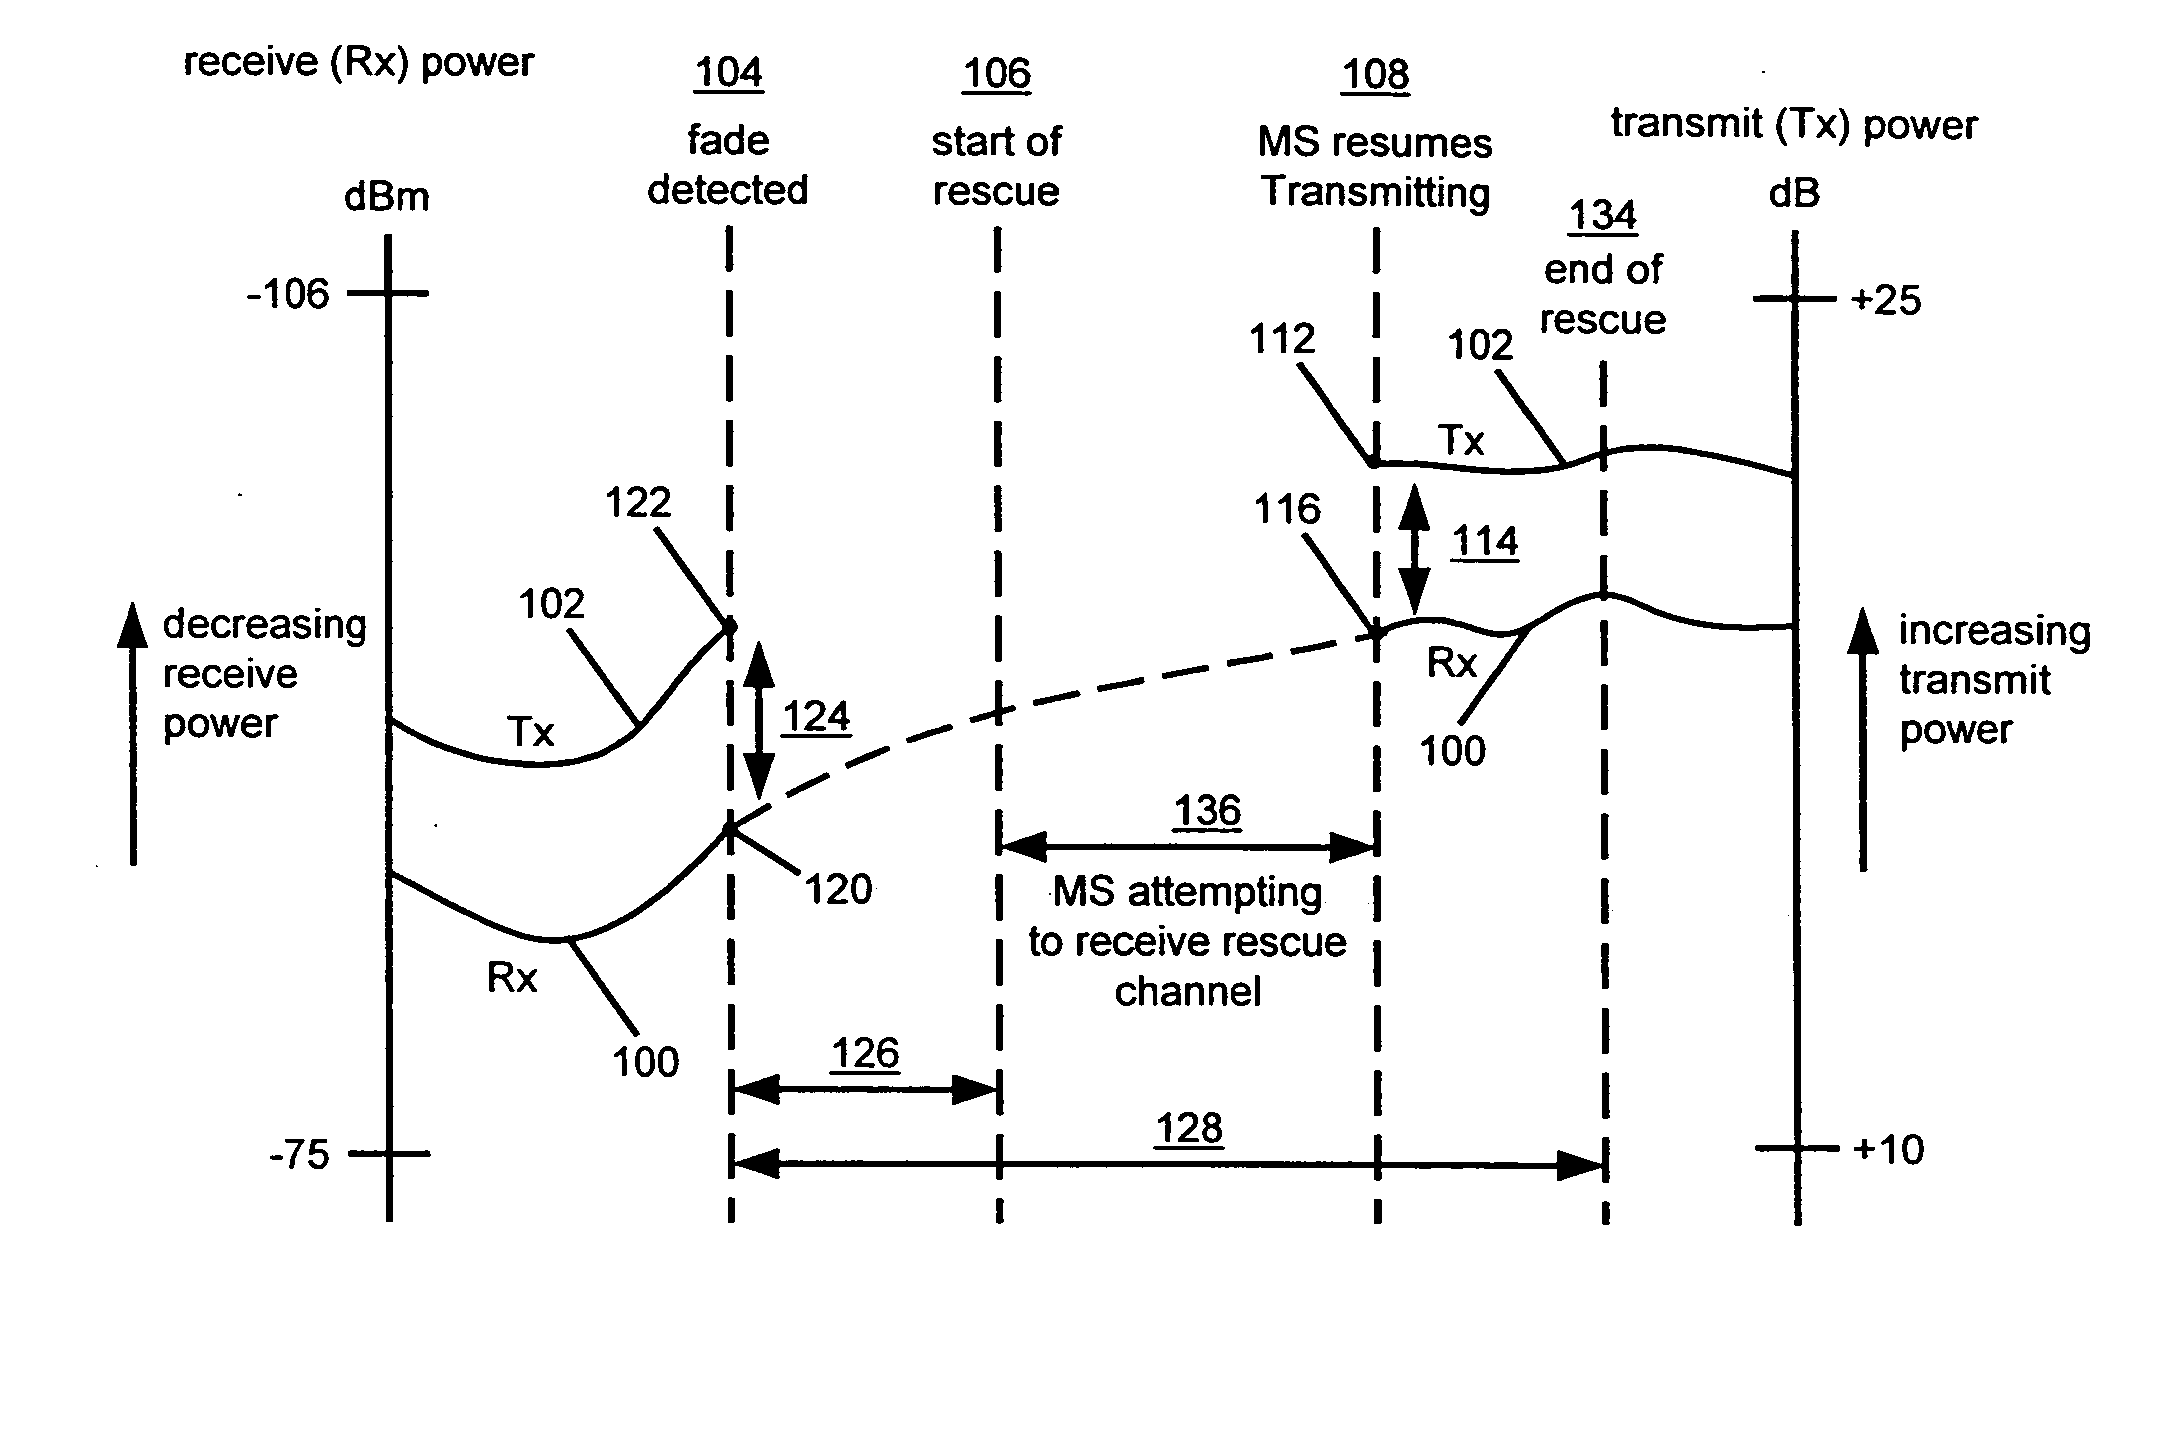 Open-loop power control enhancement for blind rescue channel operation